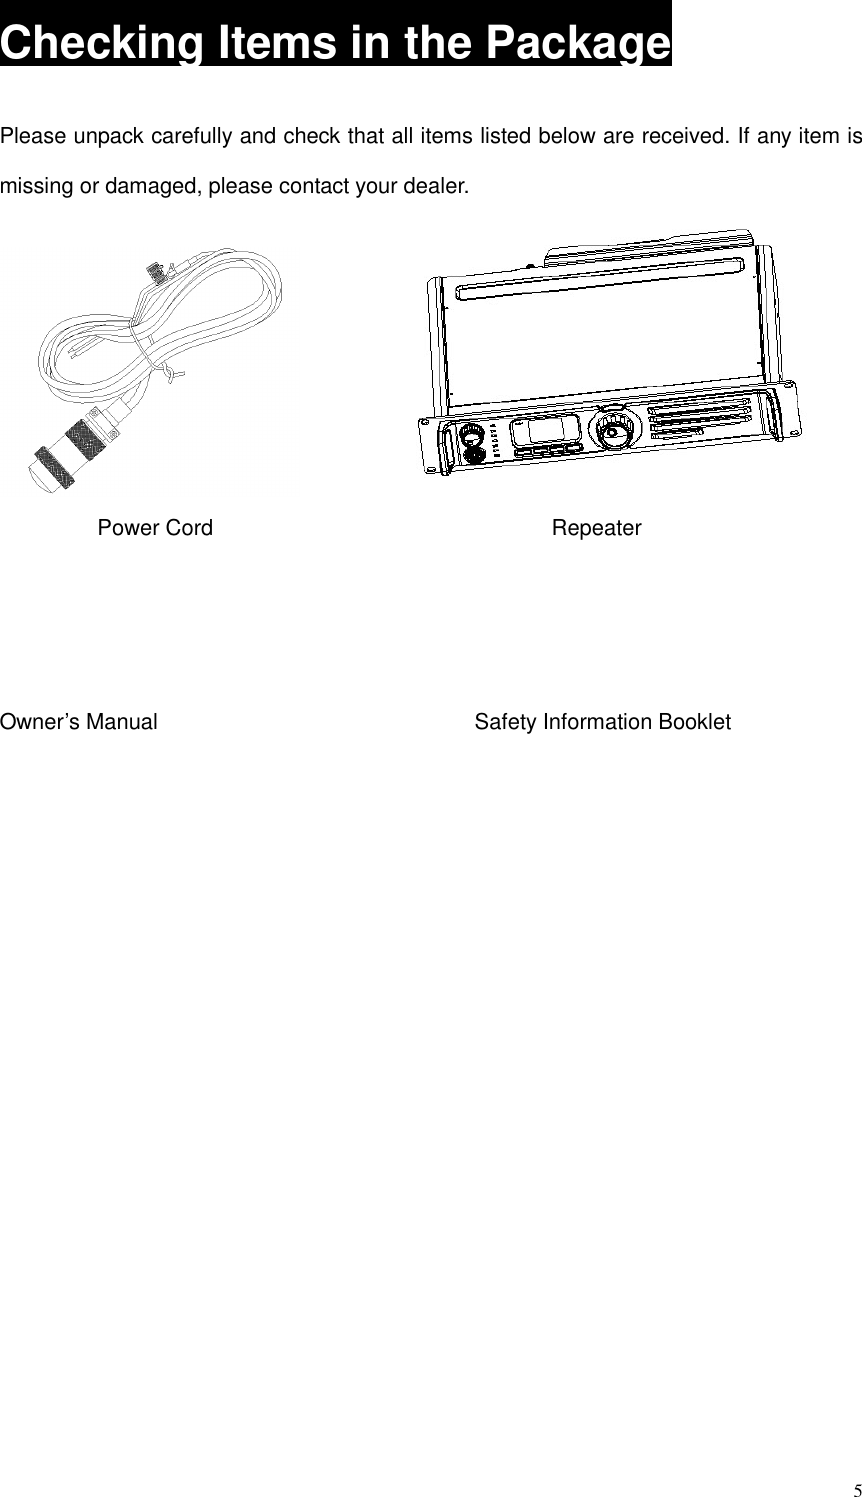 5Checking Items in the PackagePlease unpack carefully and check that all items listed below are received. If any item ismissing or damaged, please contact your dealer.Power Cord RepeaterOwner’s Manual Safety Information Booklet